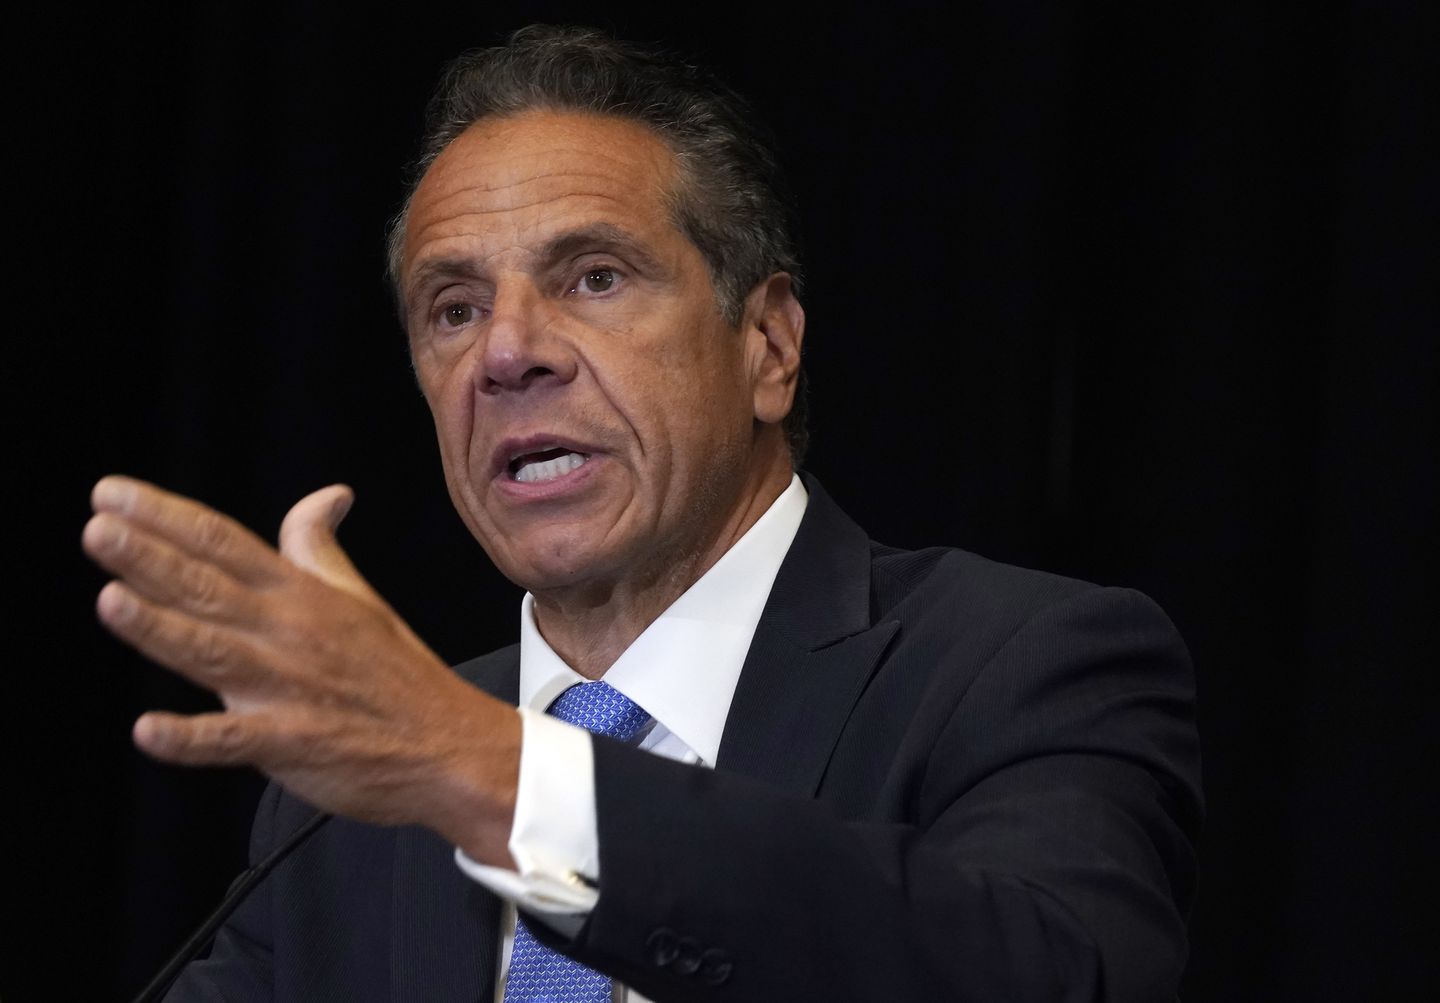 NY Gov. Cuomo sexually harassed multiple women, investigation finds